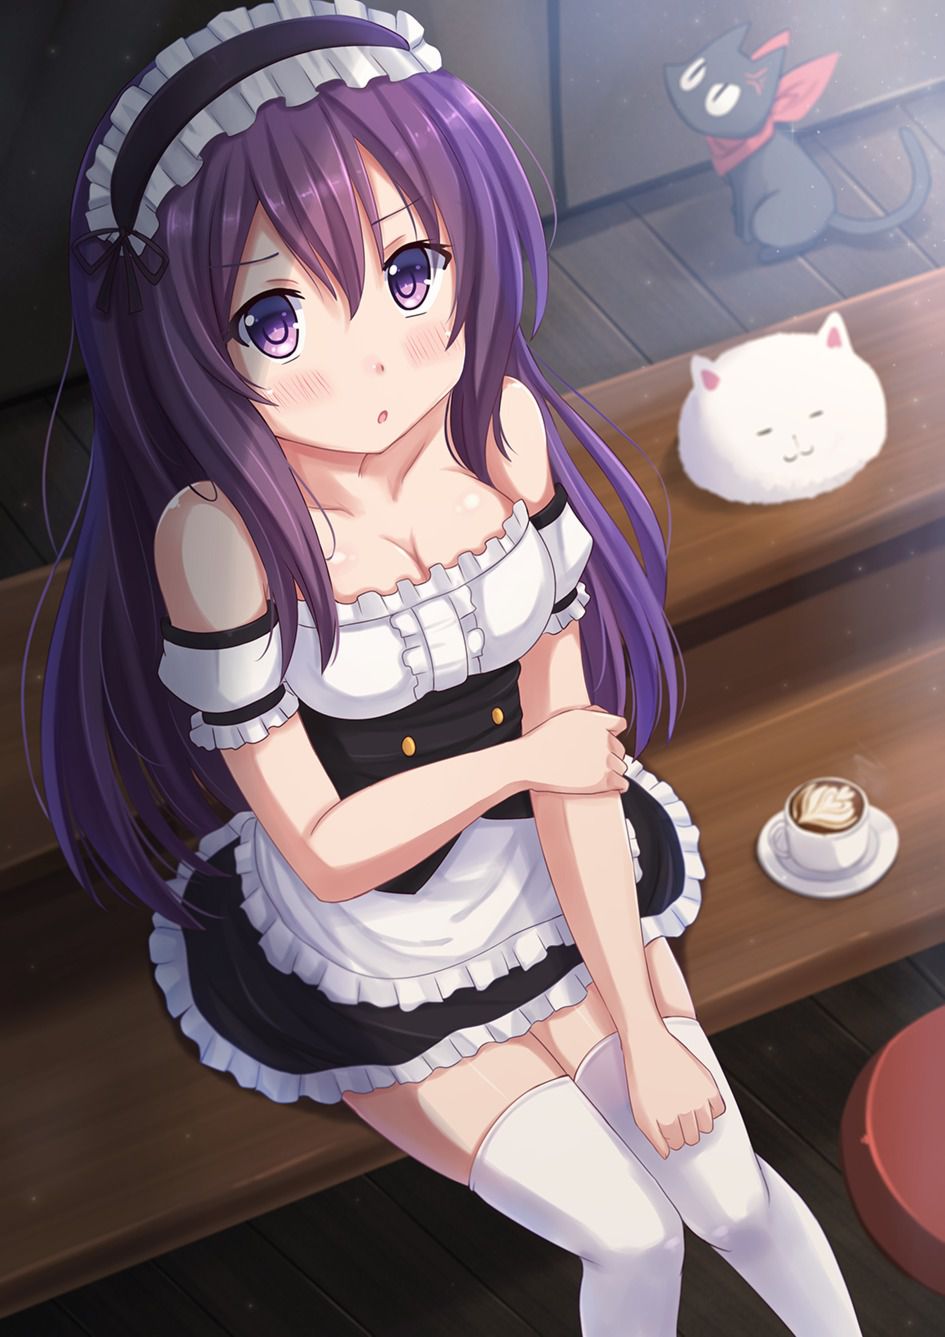 Your order is a rabbit? Picture wallpaper 07 [10] * chimame Corps Chino Rize Sharo 1000 night 8